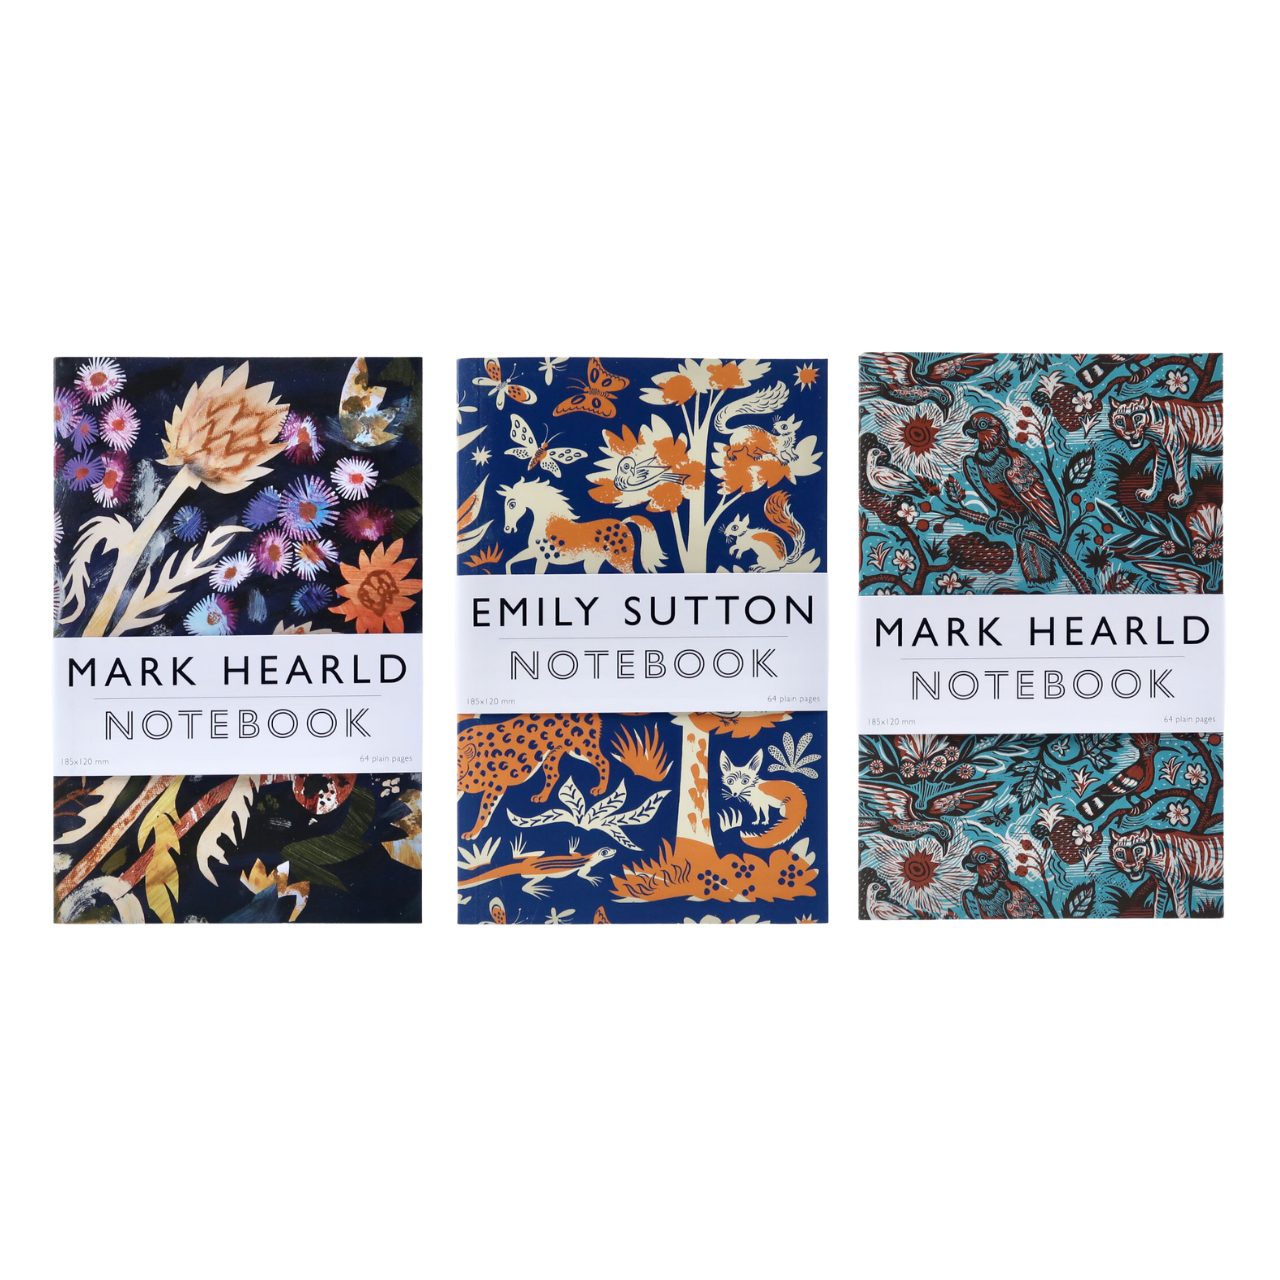 Art Angels Set of 3 Notebooks - Mark Hearld and Emily Sutton